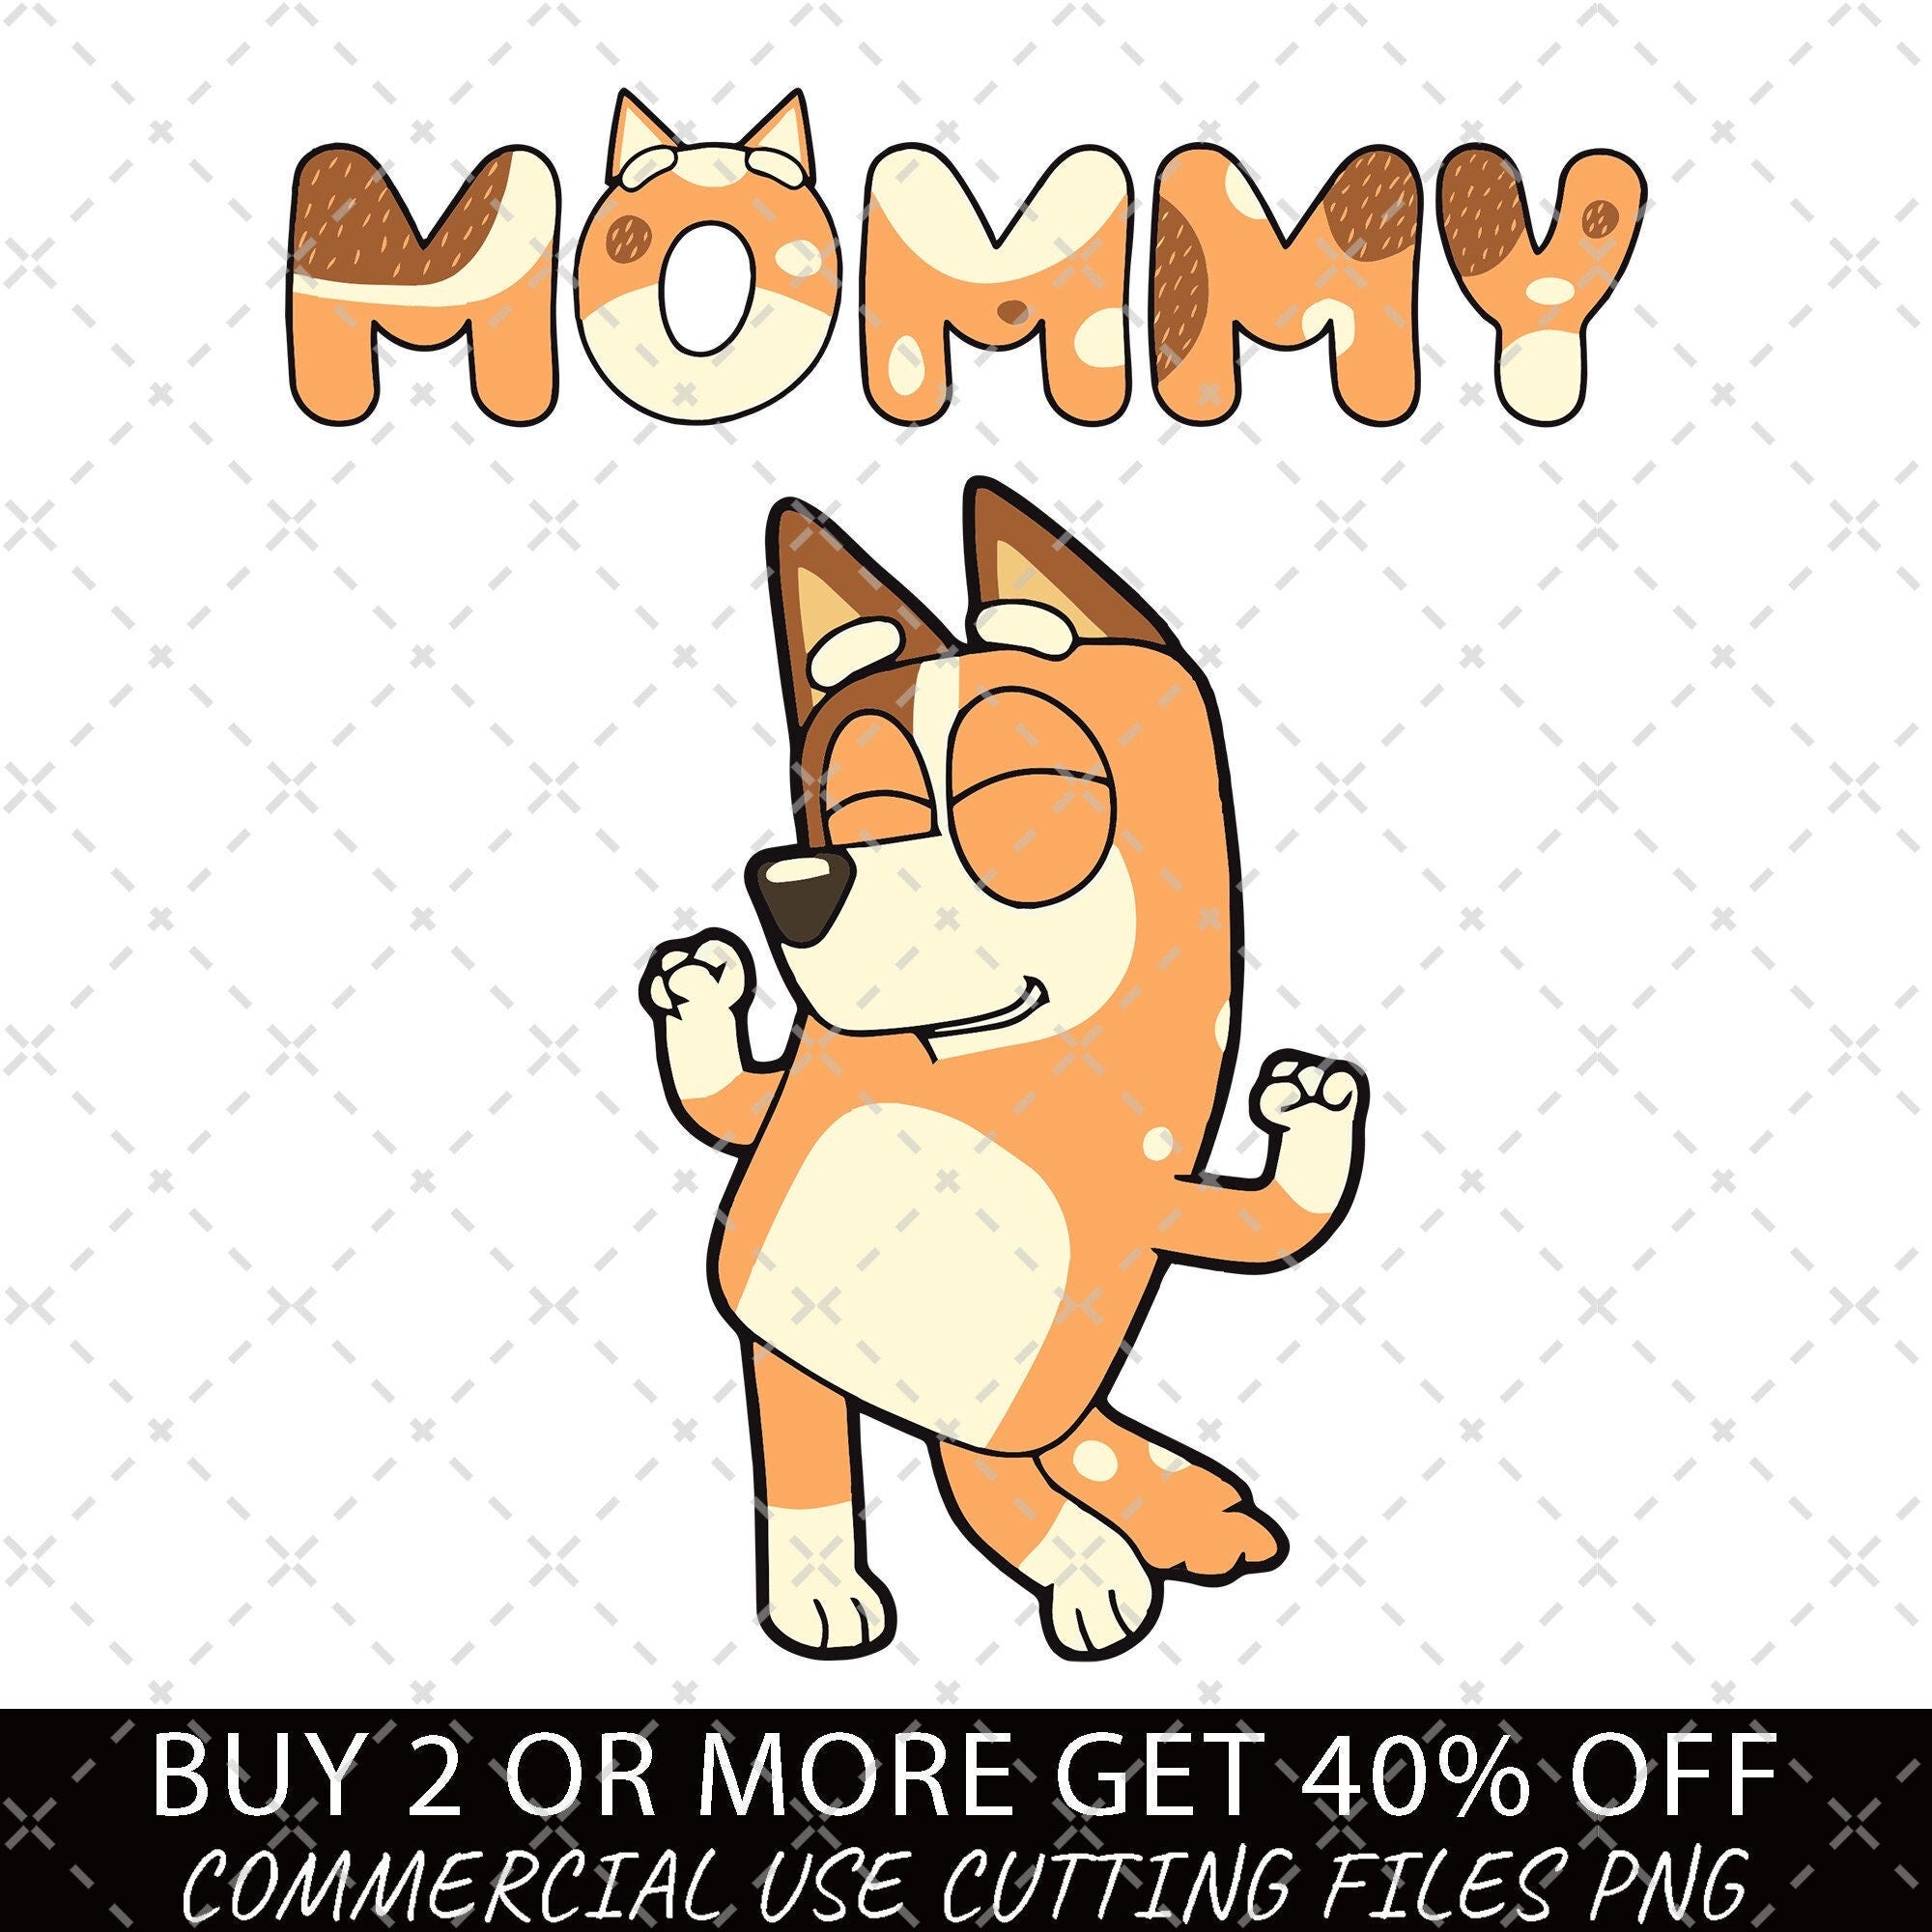 Mommy Bluey PNG, Bluey Family Png, Decal Files, Vinyl Sticker, Bluey Dad PNG, Bluey Mom Png, Bluey Friends, Bluey PNG, Mothers Day Bluey Png